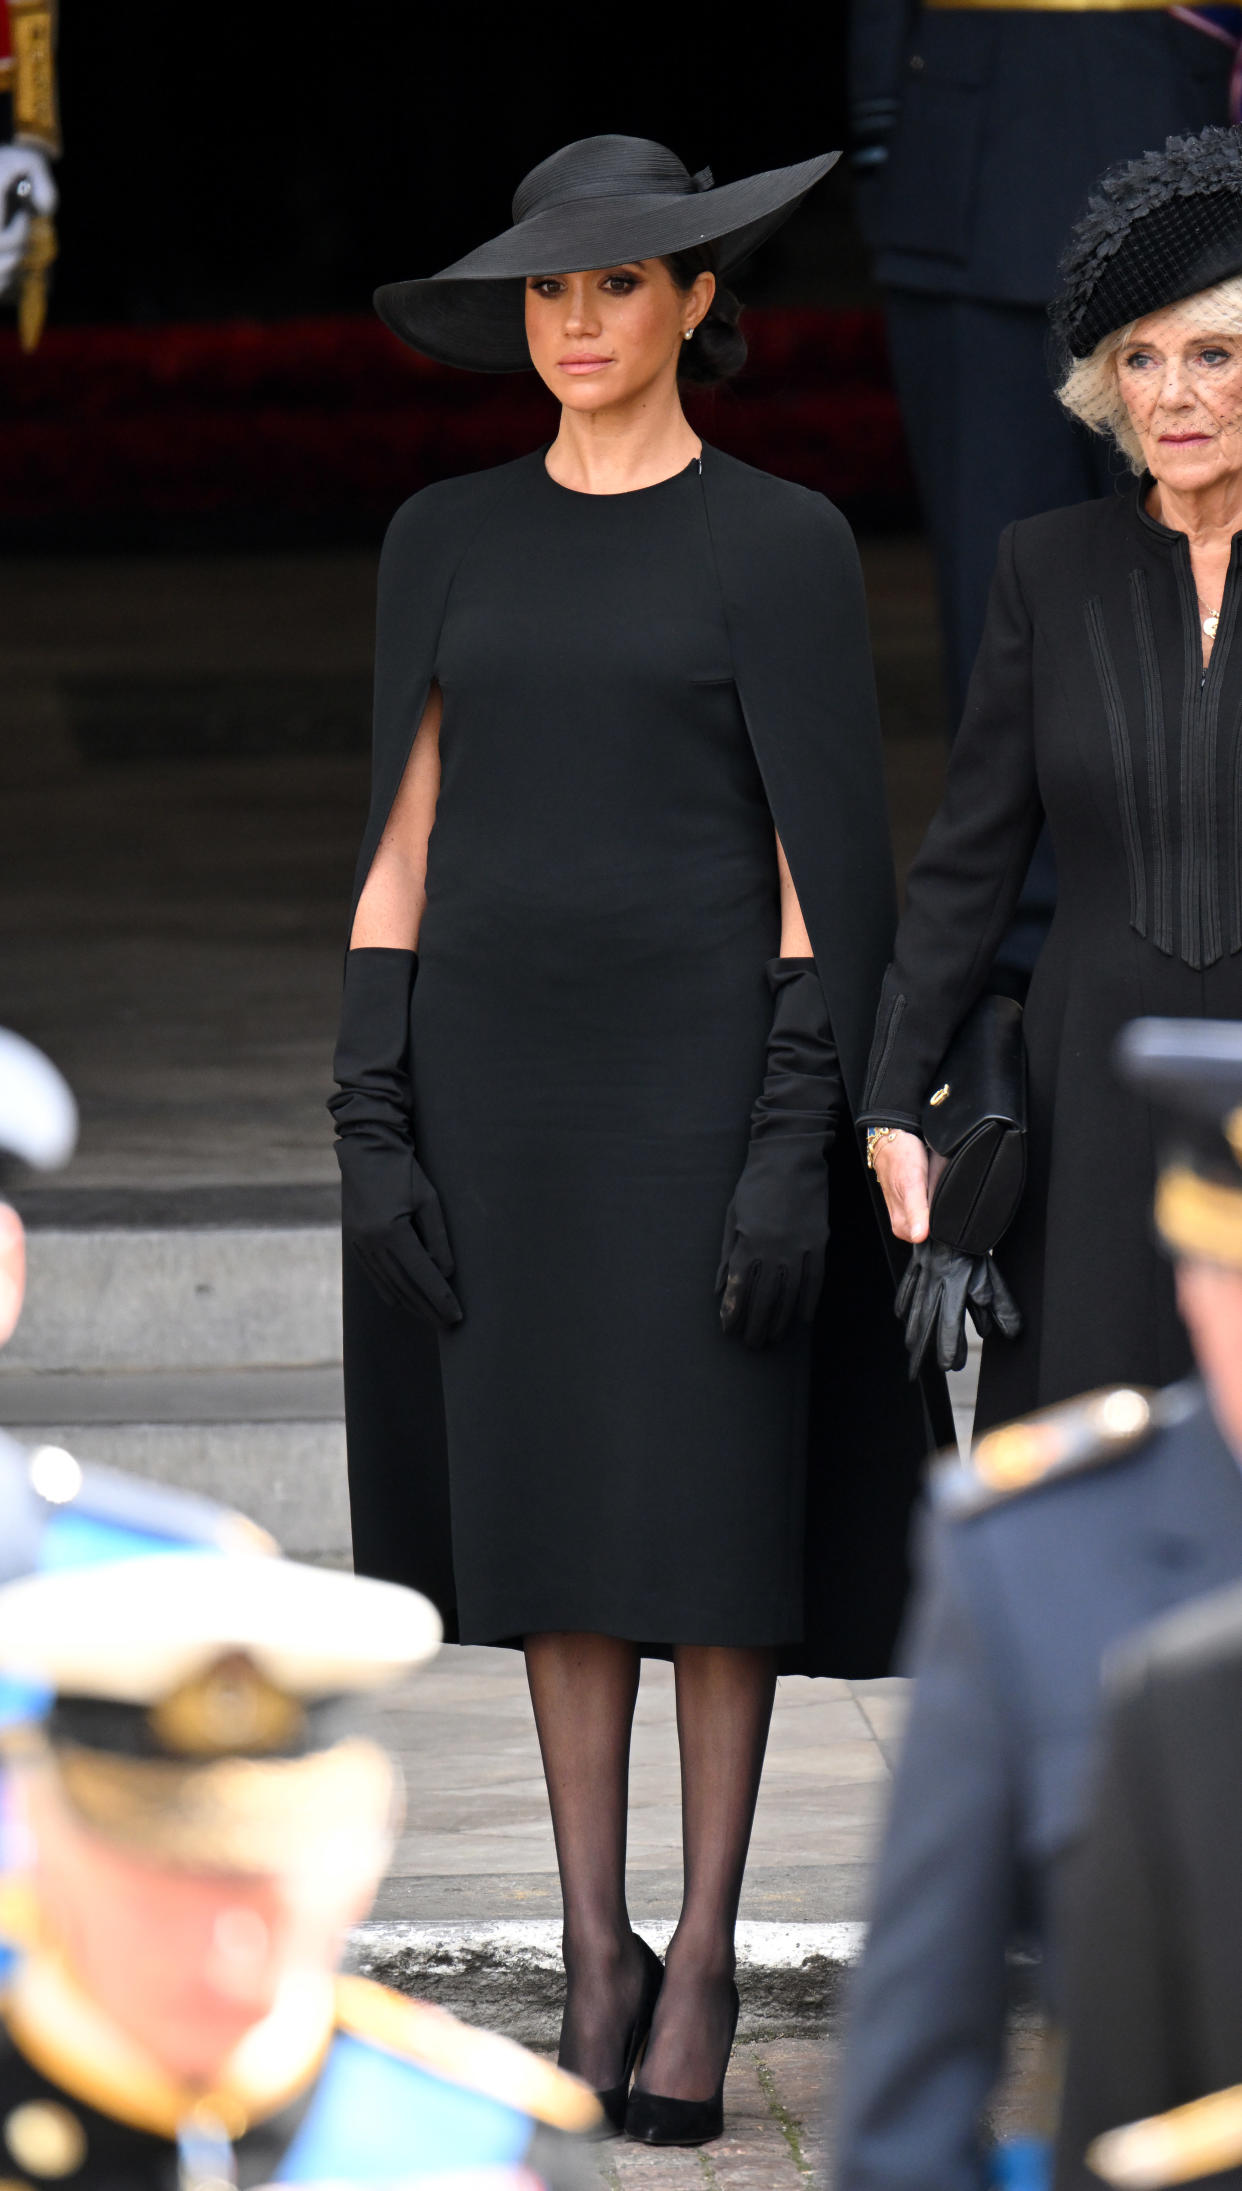 Meghan, Duchess of Sussex at the State Funeral of Queen Elizabeth II on September 19, 2022. (Getty Images)